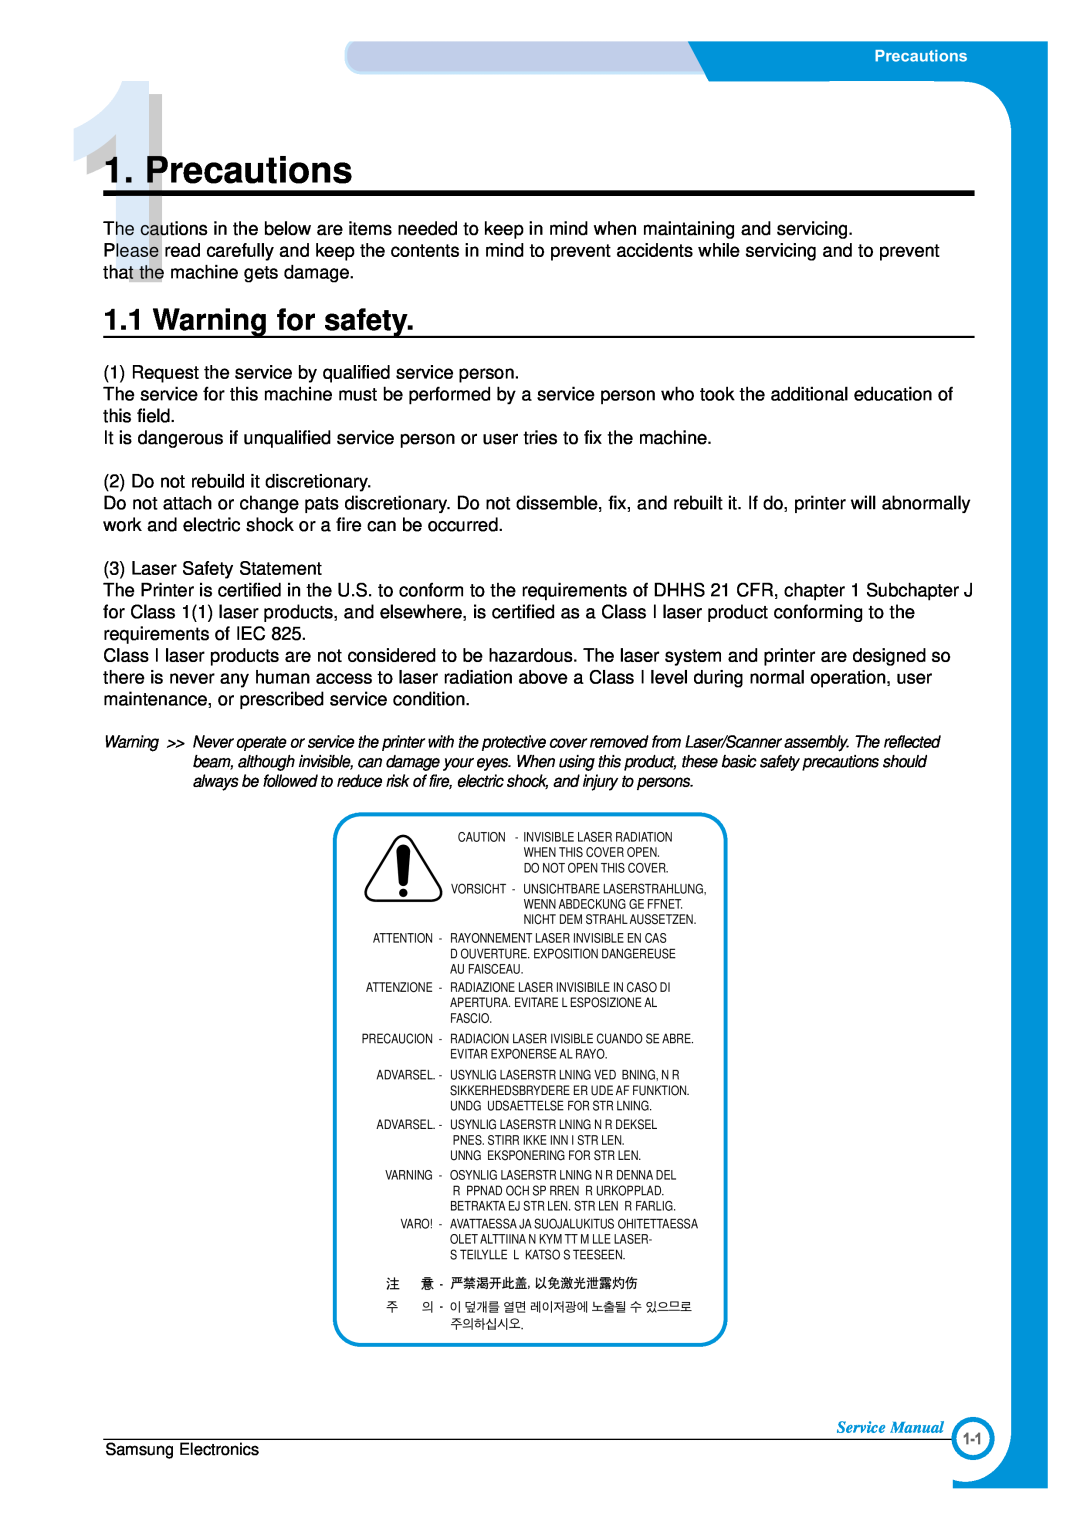 Samsung ML-1700 specifications Precautions, Warning for safety 